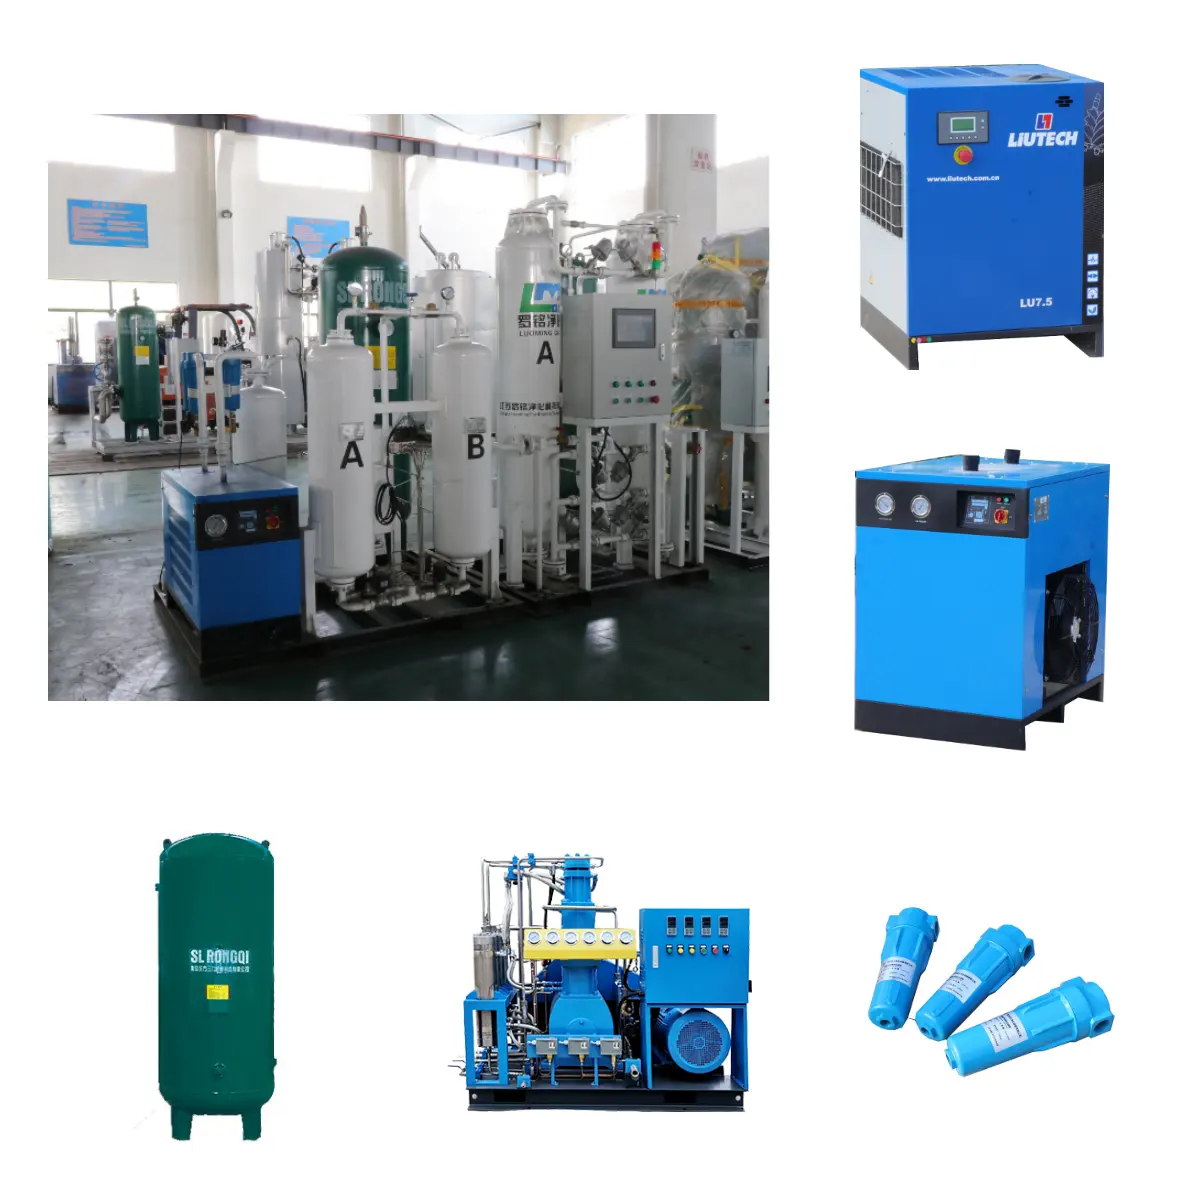 Electric Industry Medical Cheap Price Oxygen High Pressure Bar Equipment Oxygen